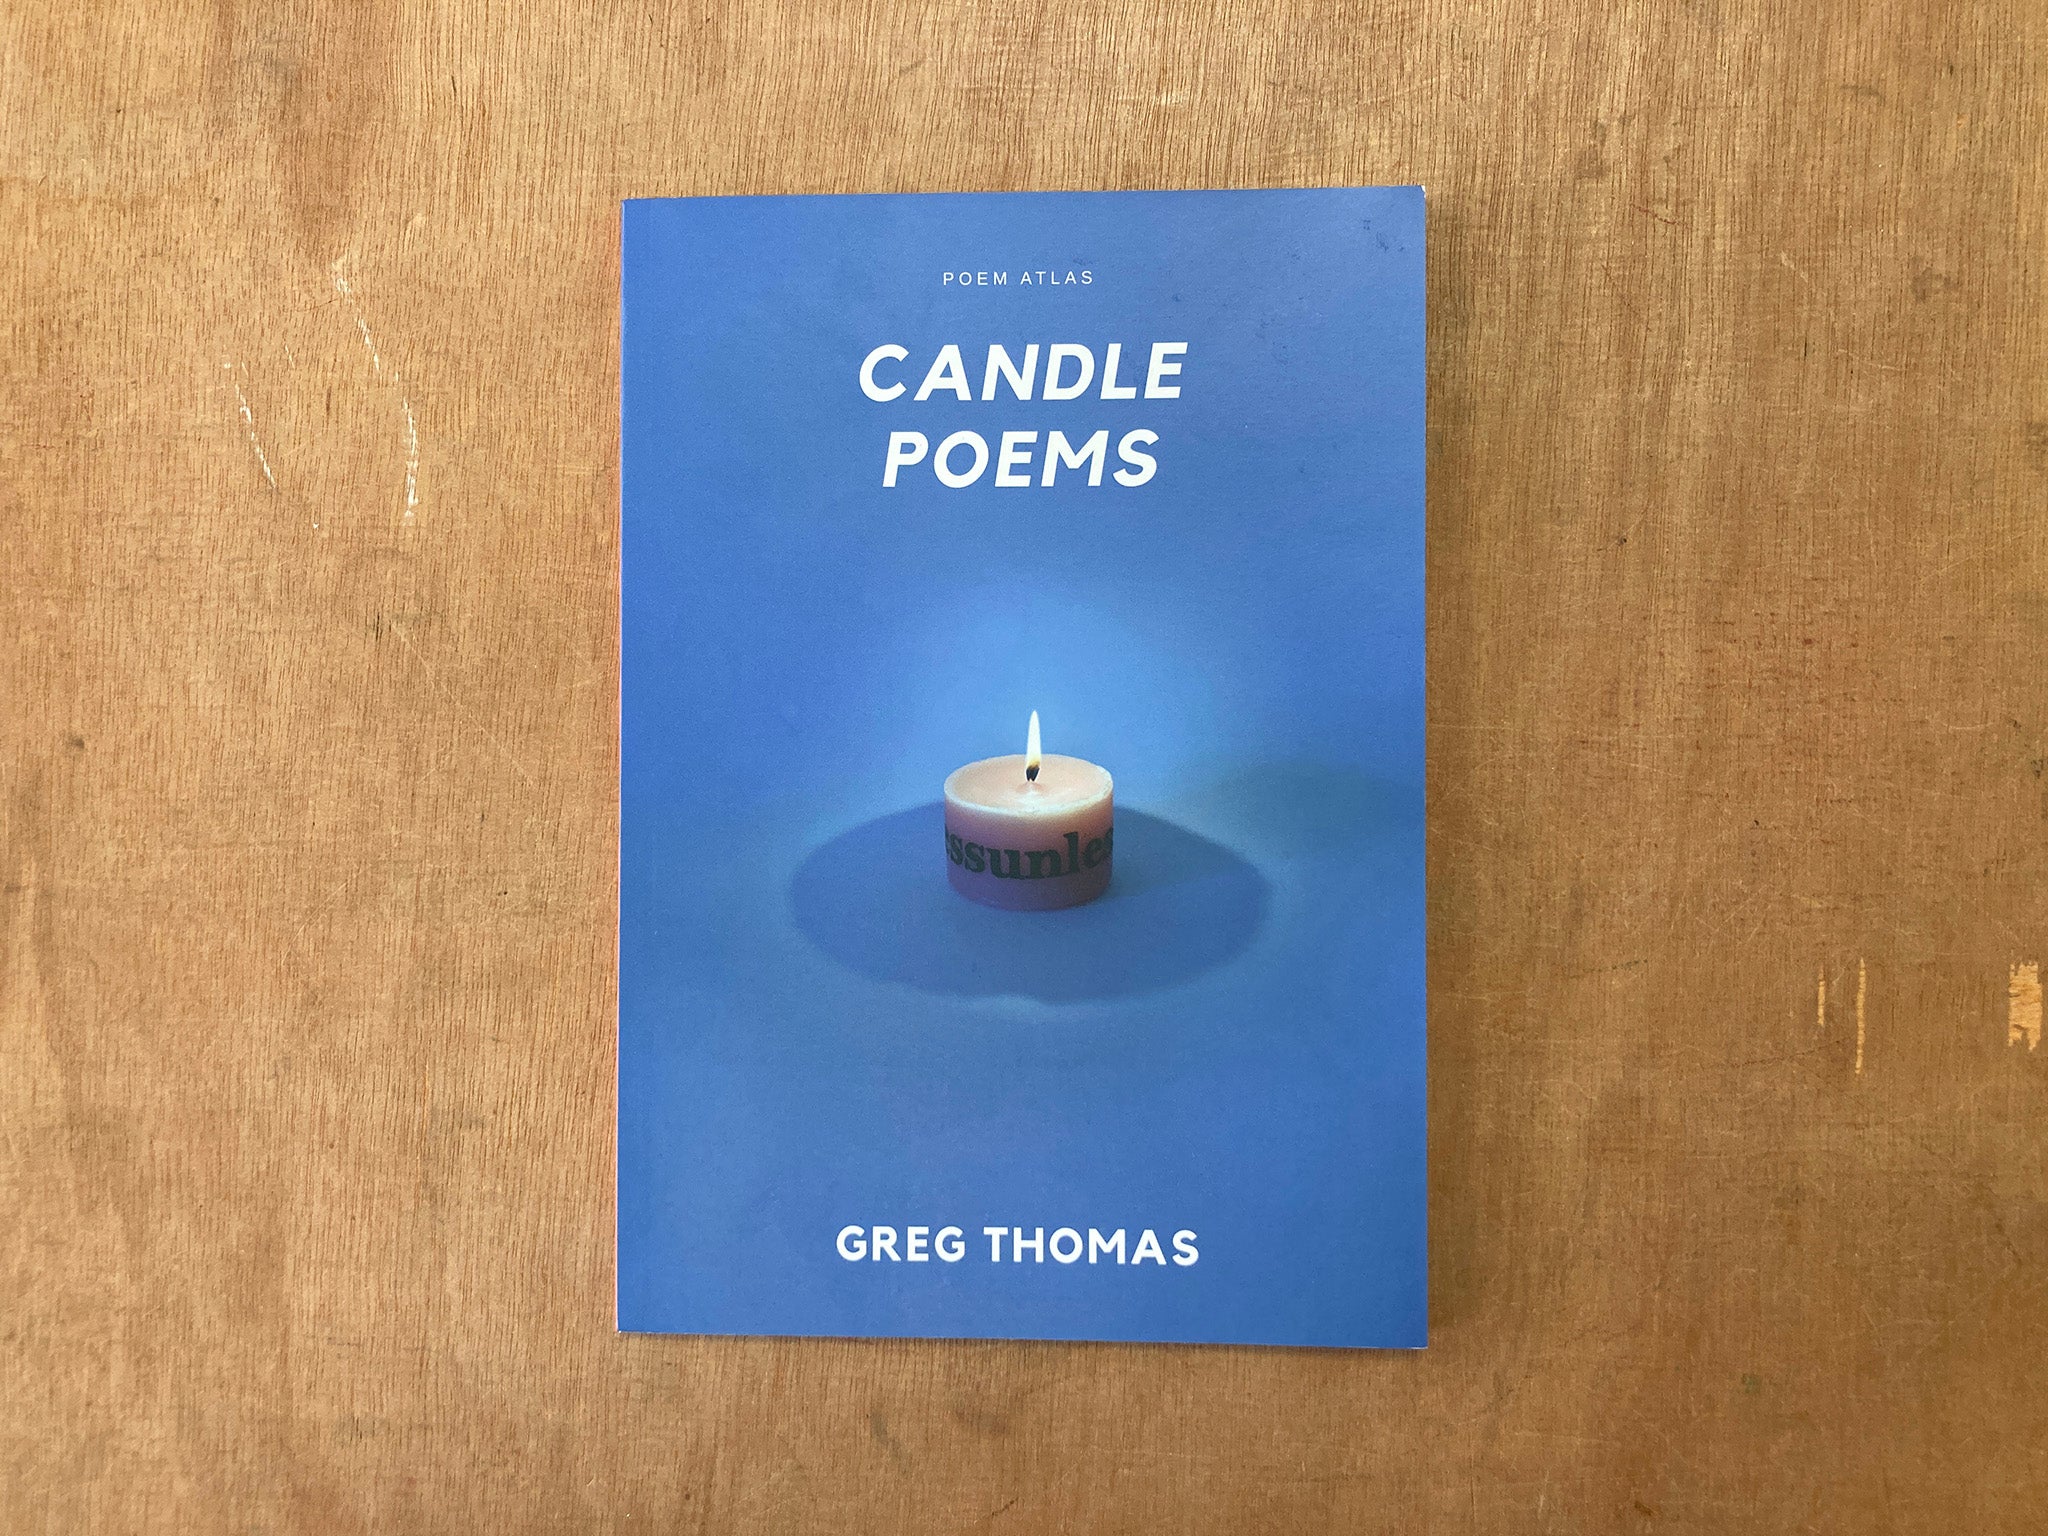 CANDLE POEMS by Greg Thomas